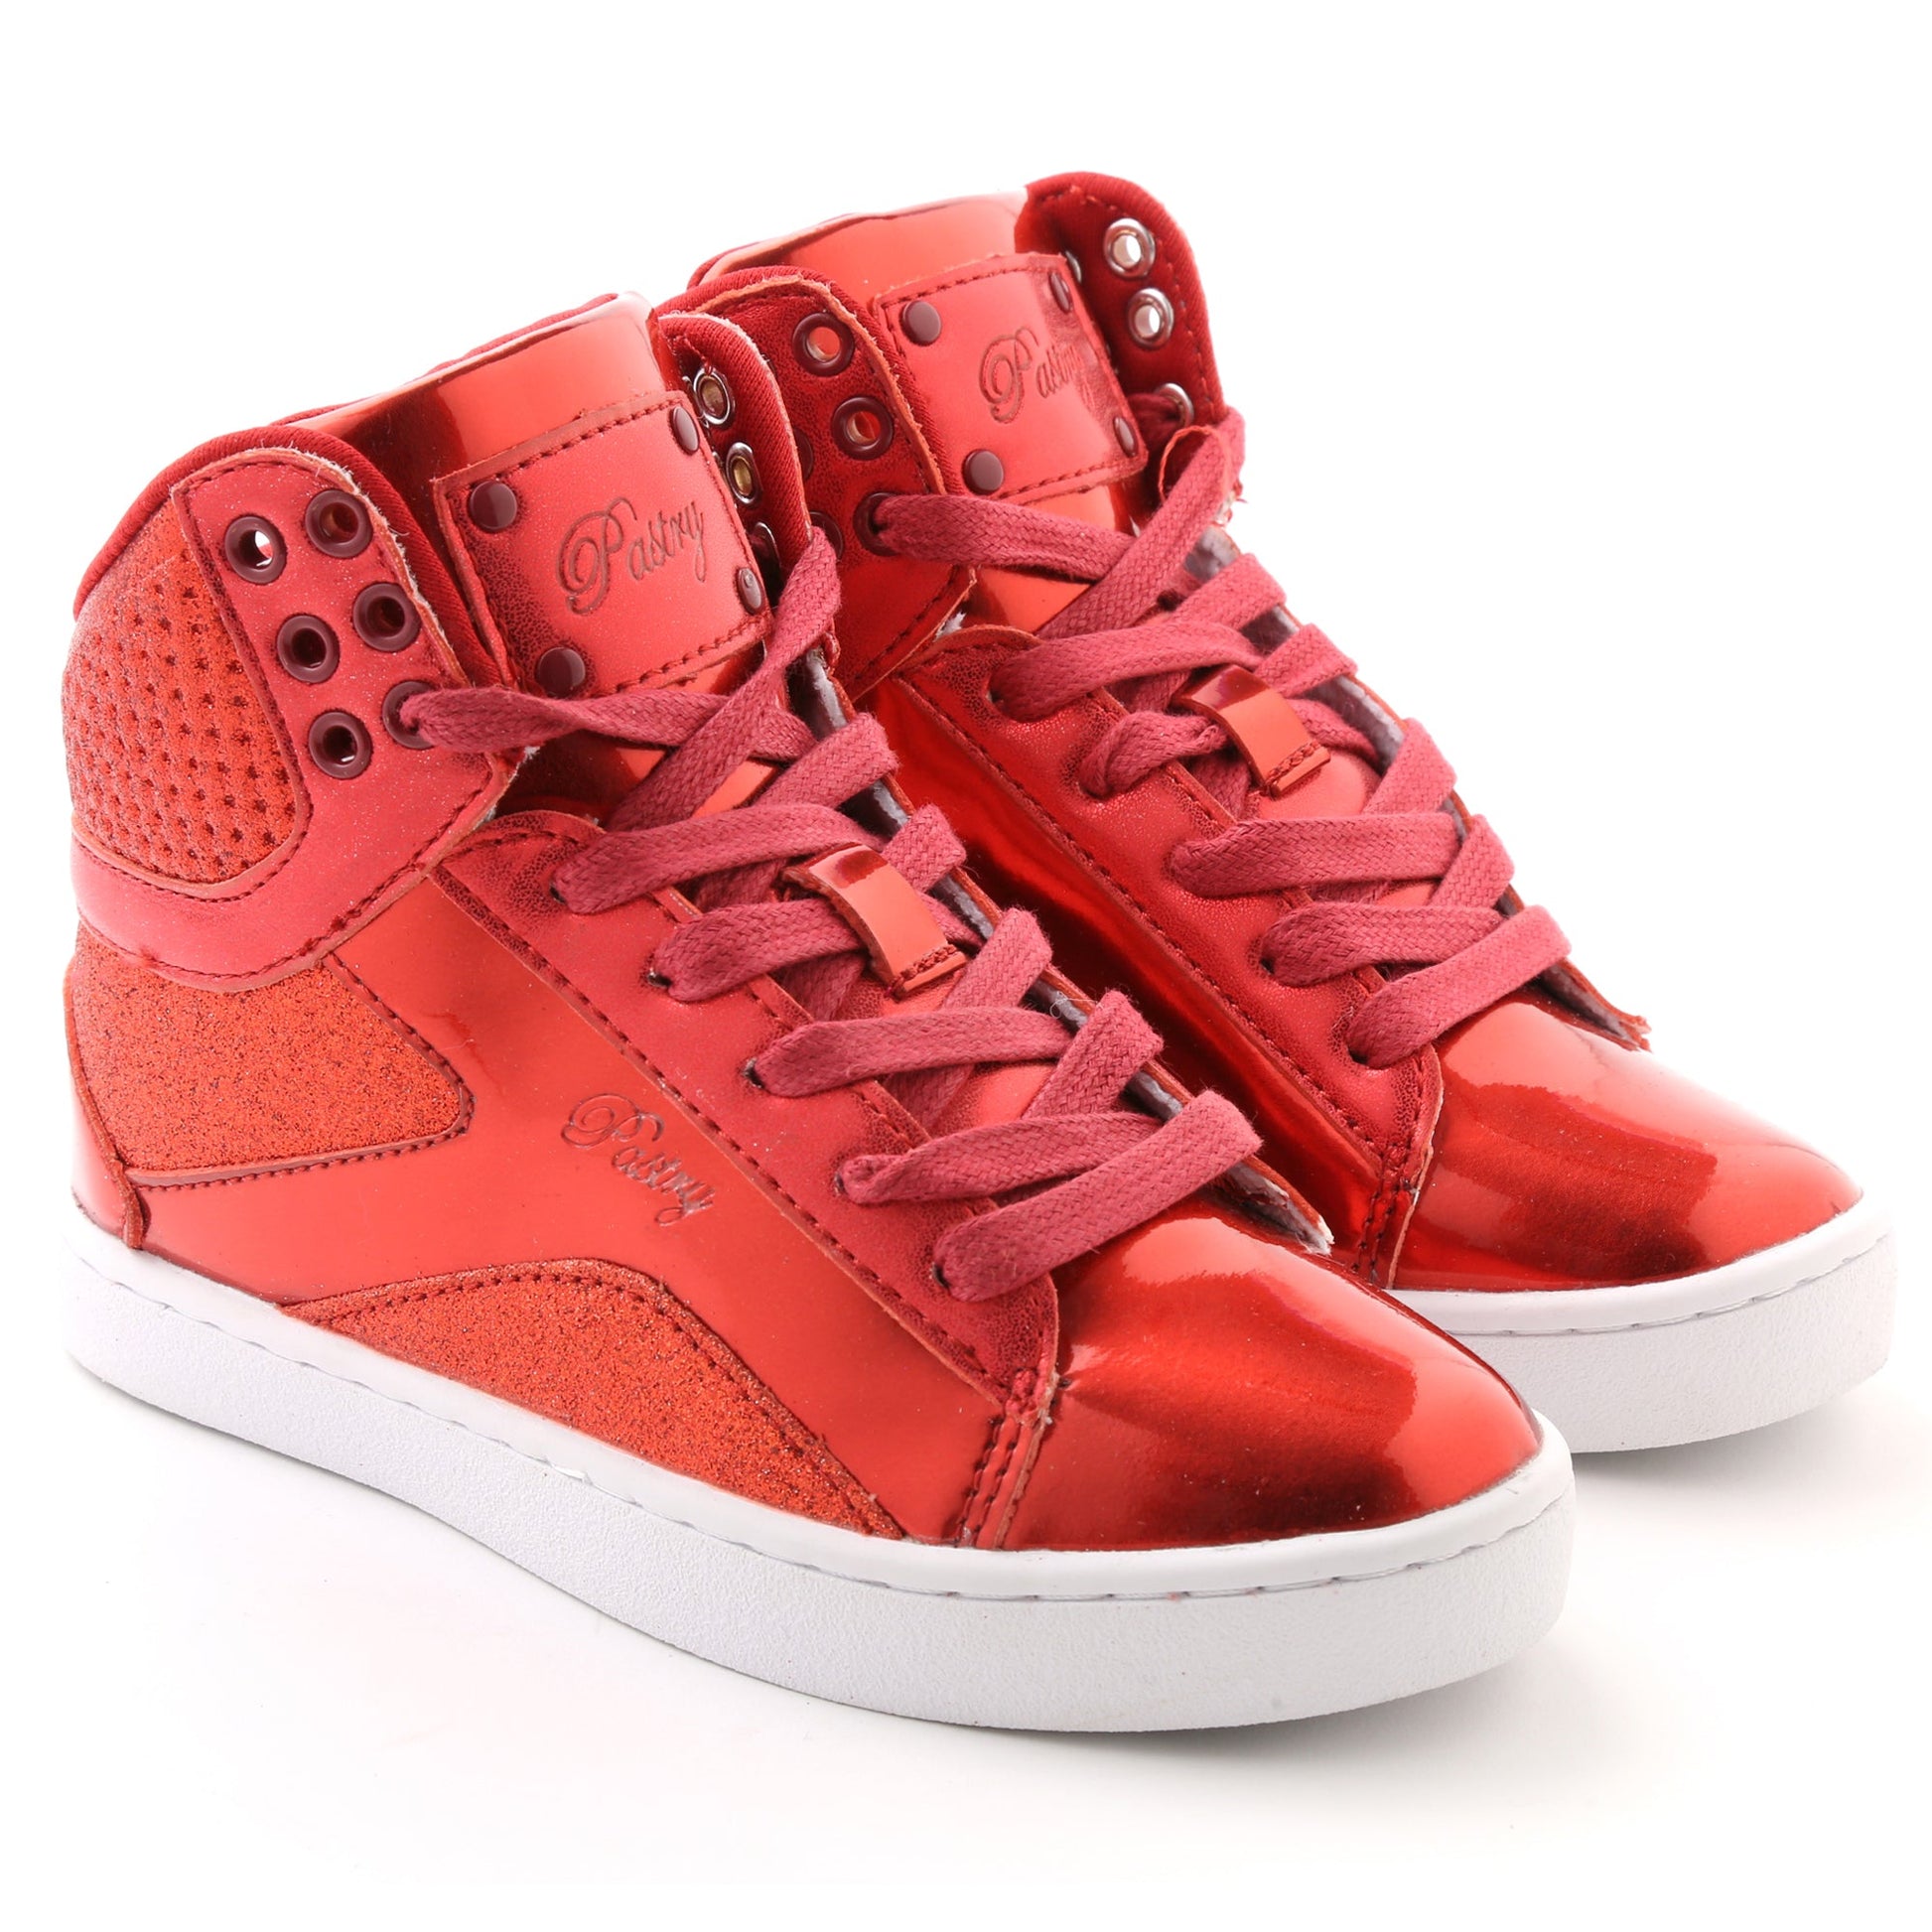 Pair of Pastry Pop Tart Glitter Youth Sneaker in Red